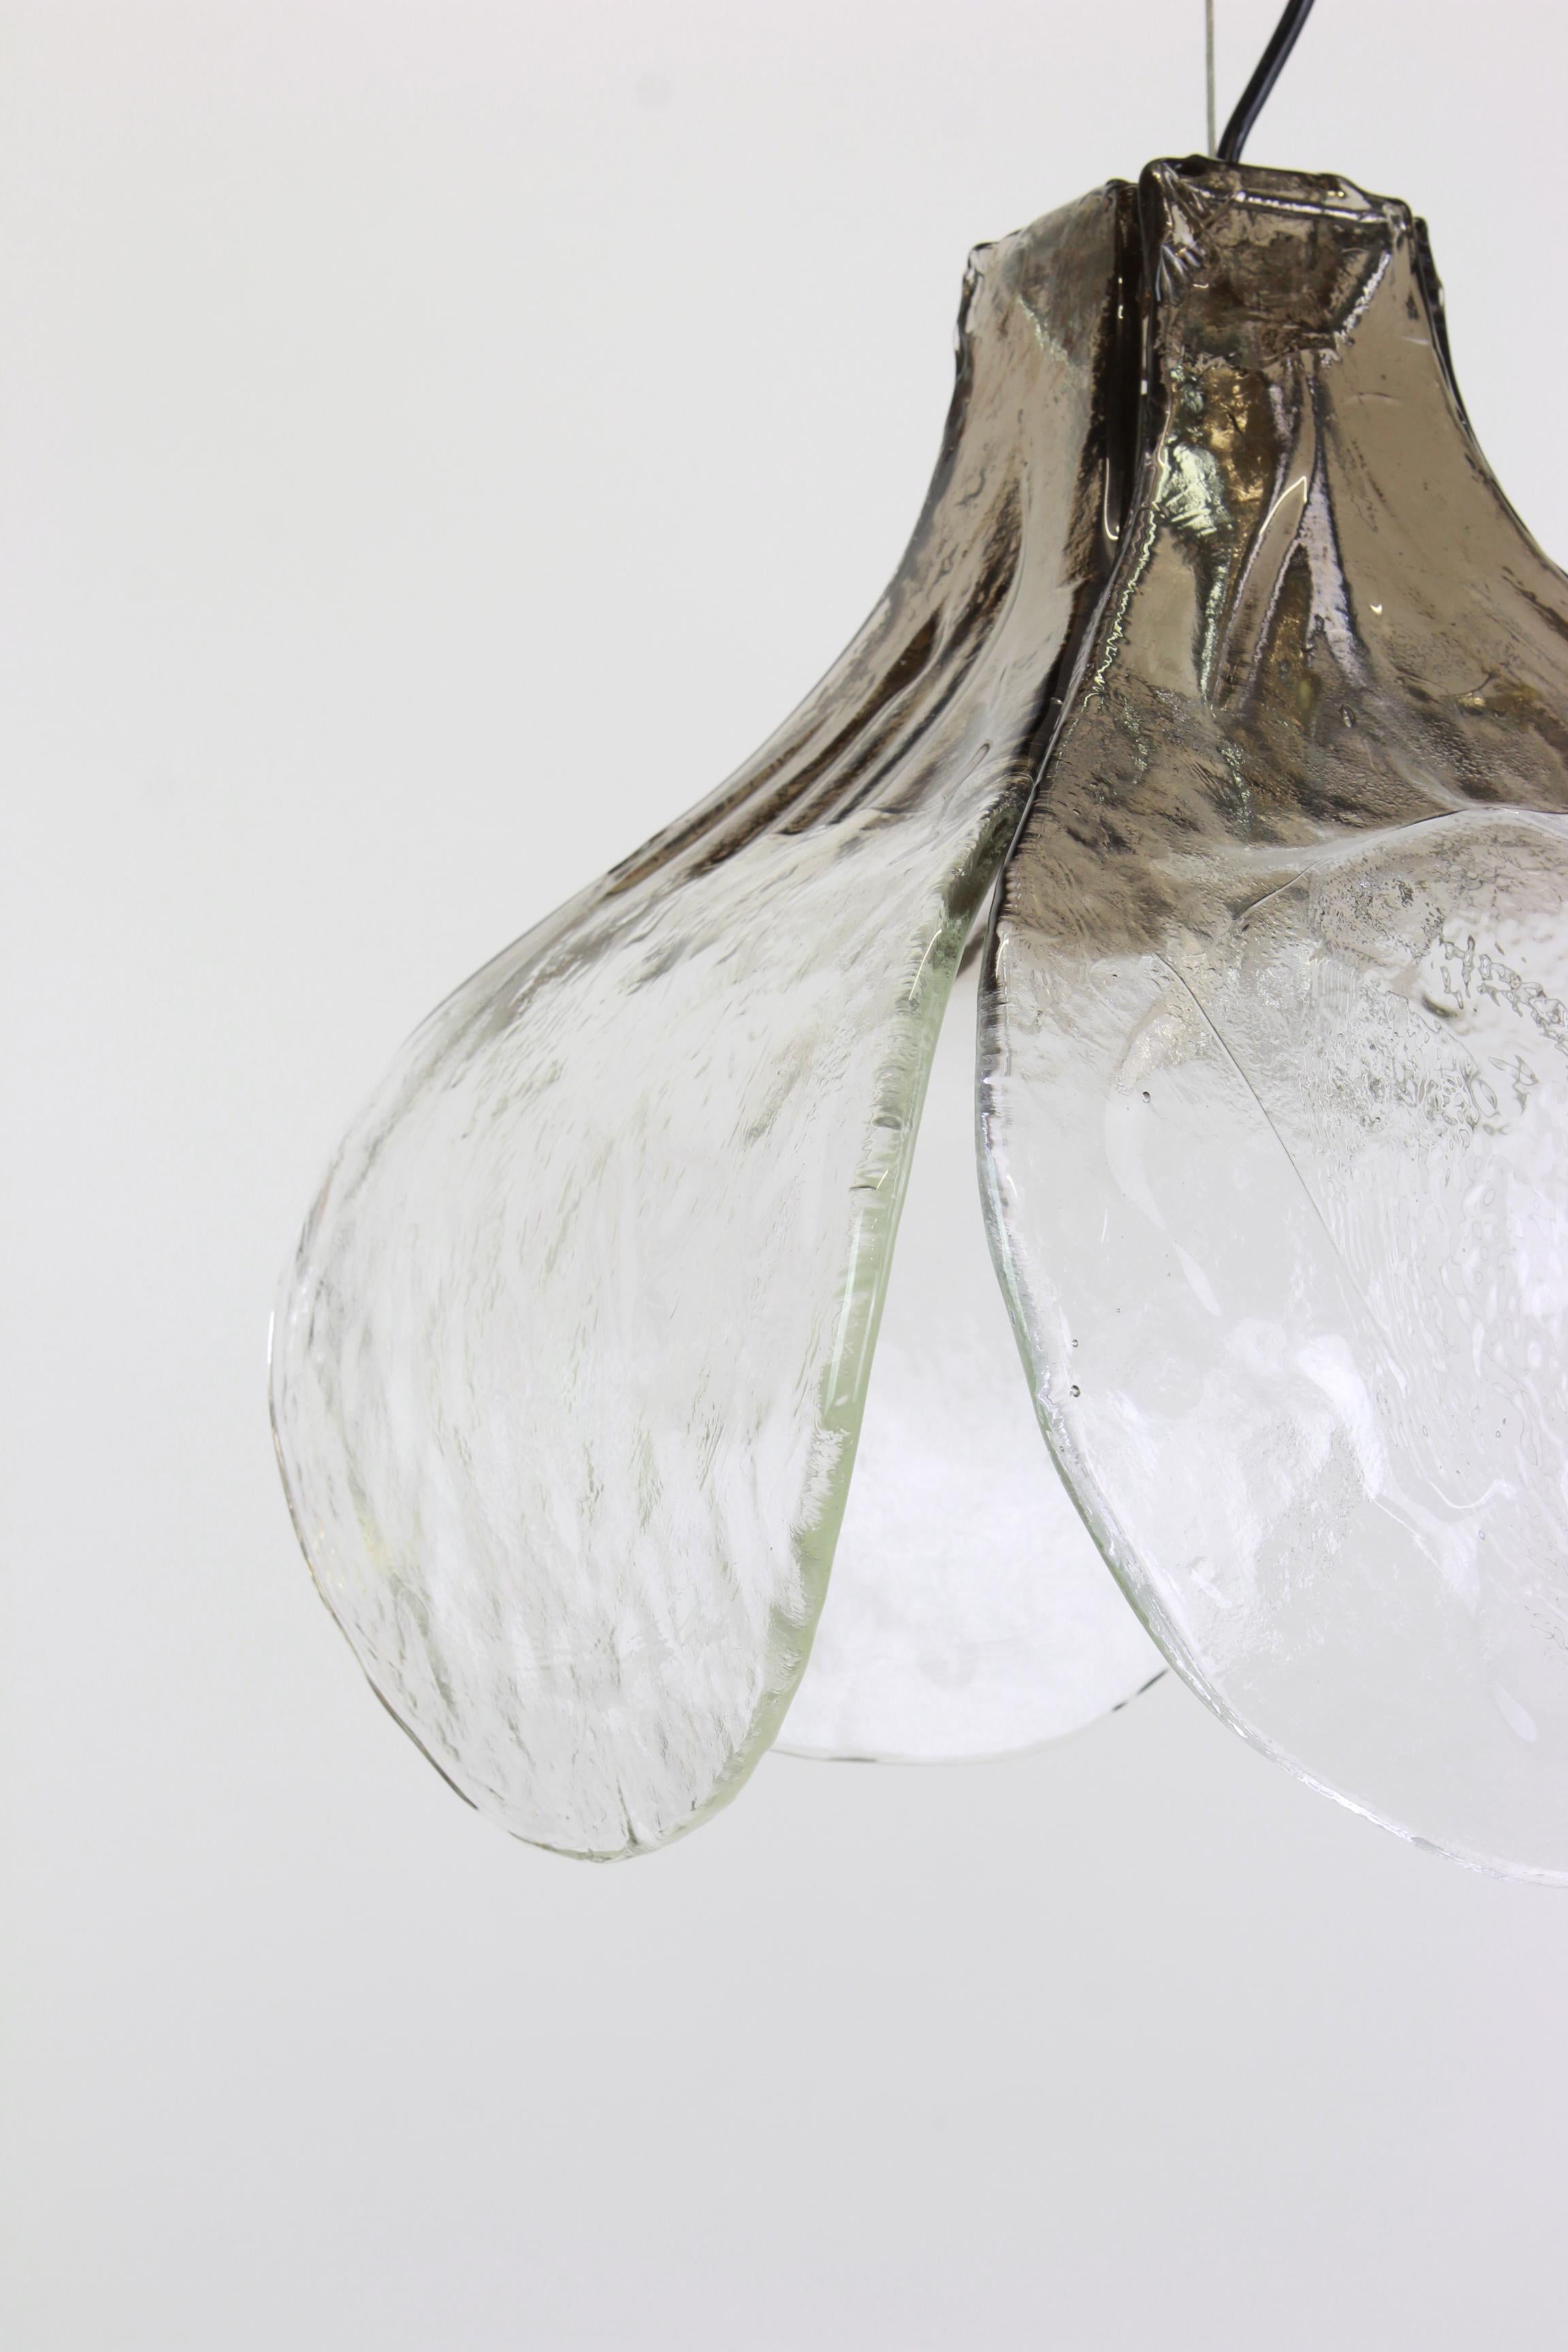 Murano pendant light designed by Carlo Nason for Mazzega, 1970s

A wonderful floral pendant light with four large hand blown clear and smoked Murano glass petals which are supported by a metal frame, designed by Carlo Nason for Mazzega, 1970s

Heavy